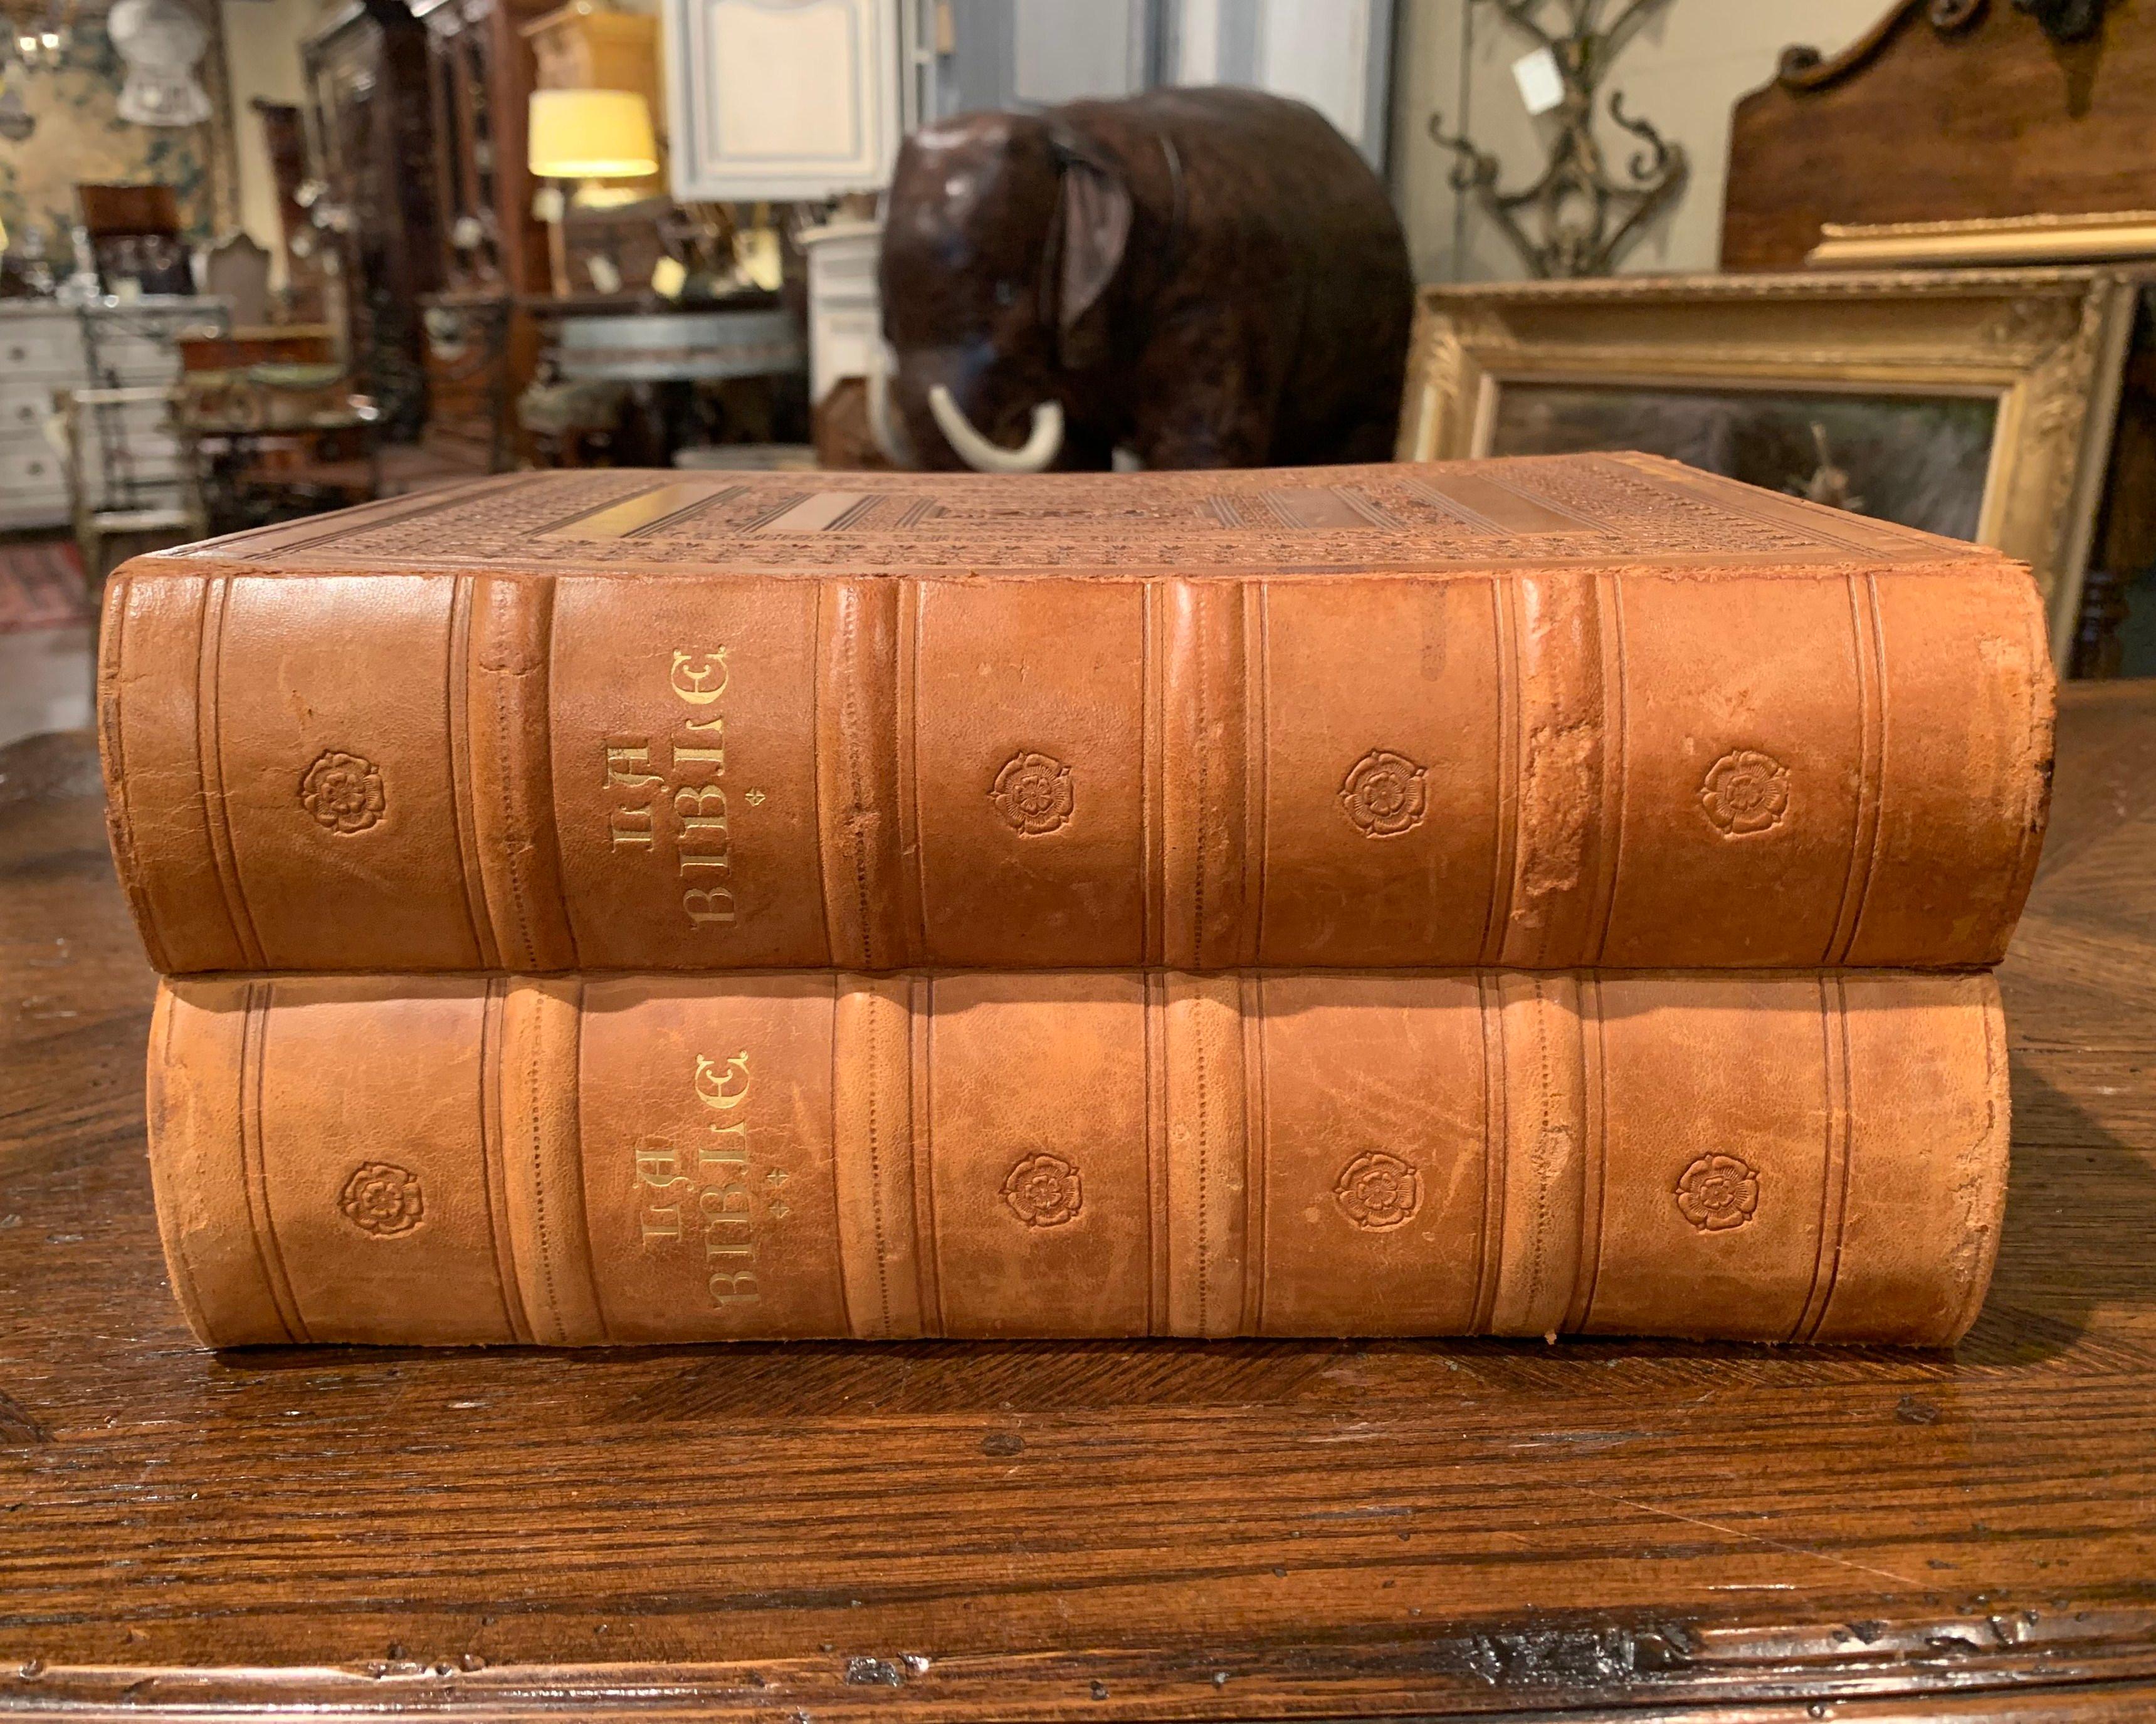 These two holy Bible books with brown leather covers were printed in Marseilles, France, dated 1953, each of the two books features the new and old testament translated by Robert Tamisier and Francois Amiot. Both religious items are embellished by